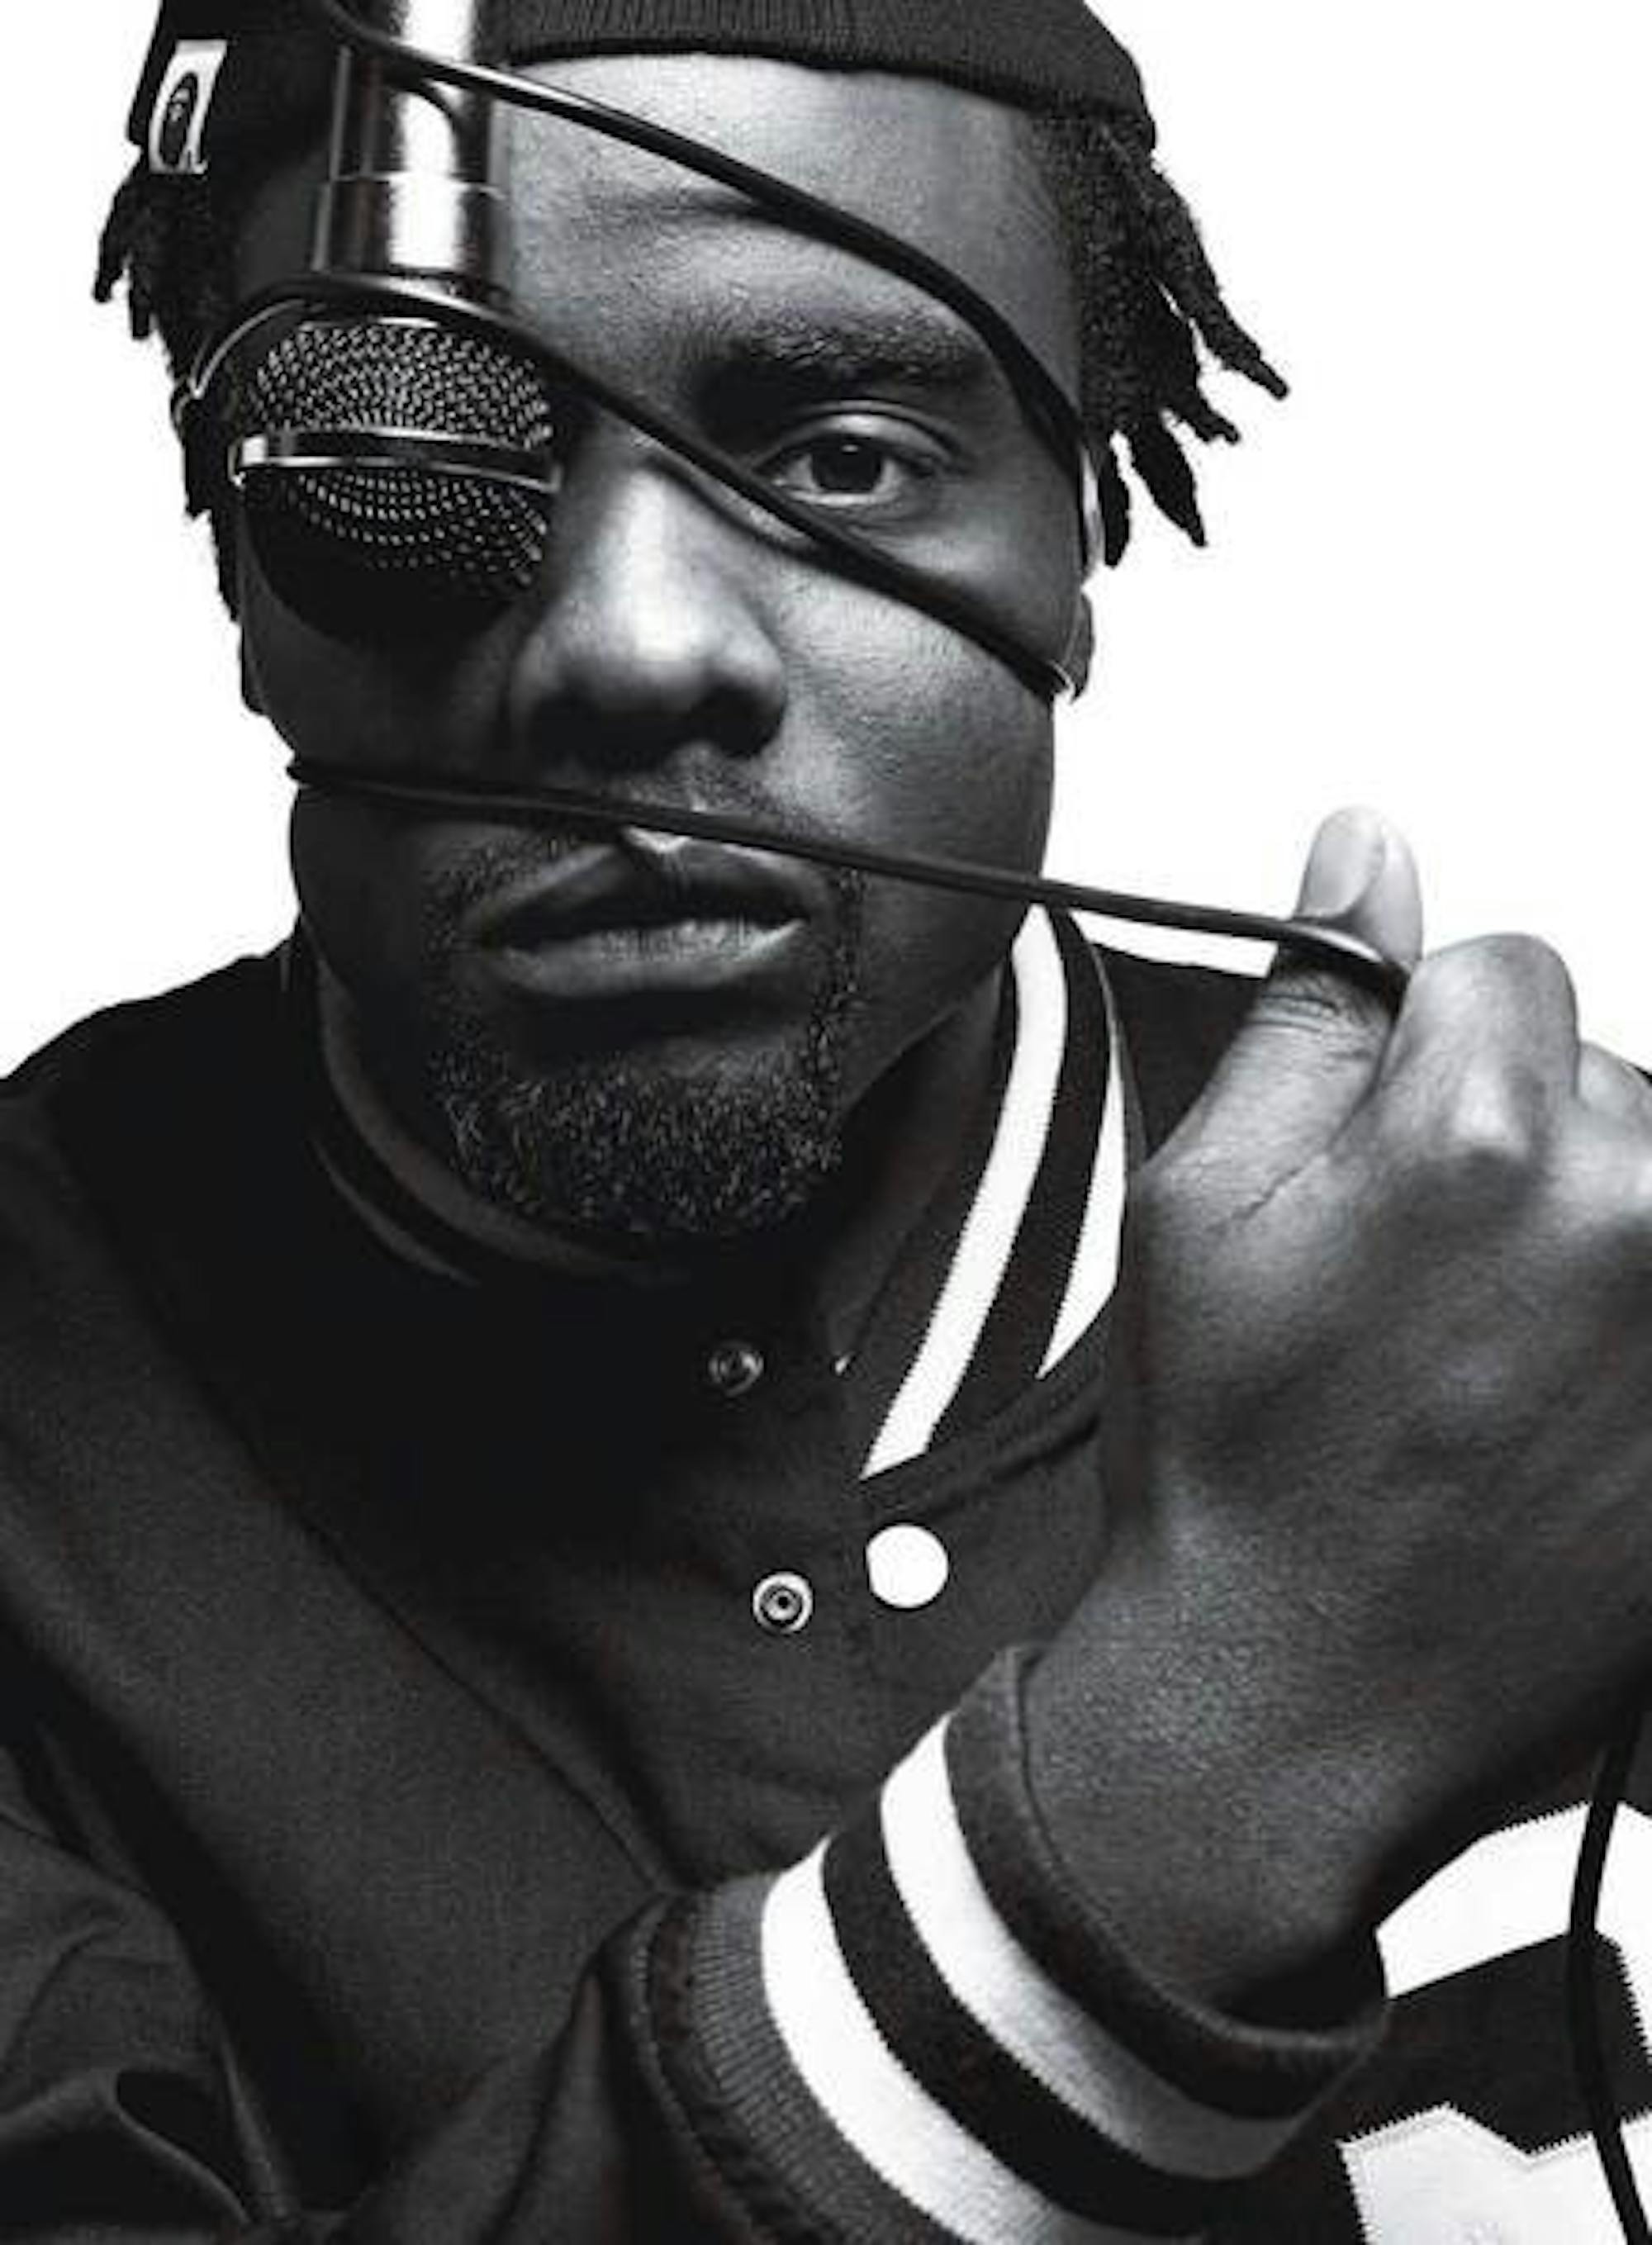 After three high-profile mixtapes, hip-hop artist Wale has released his major-label debut, 